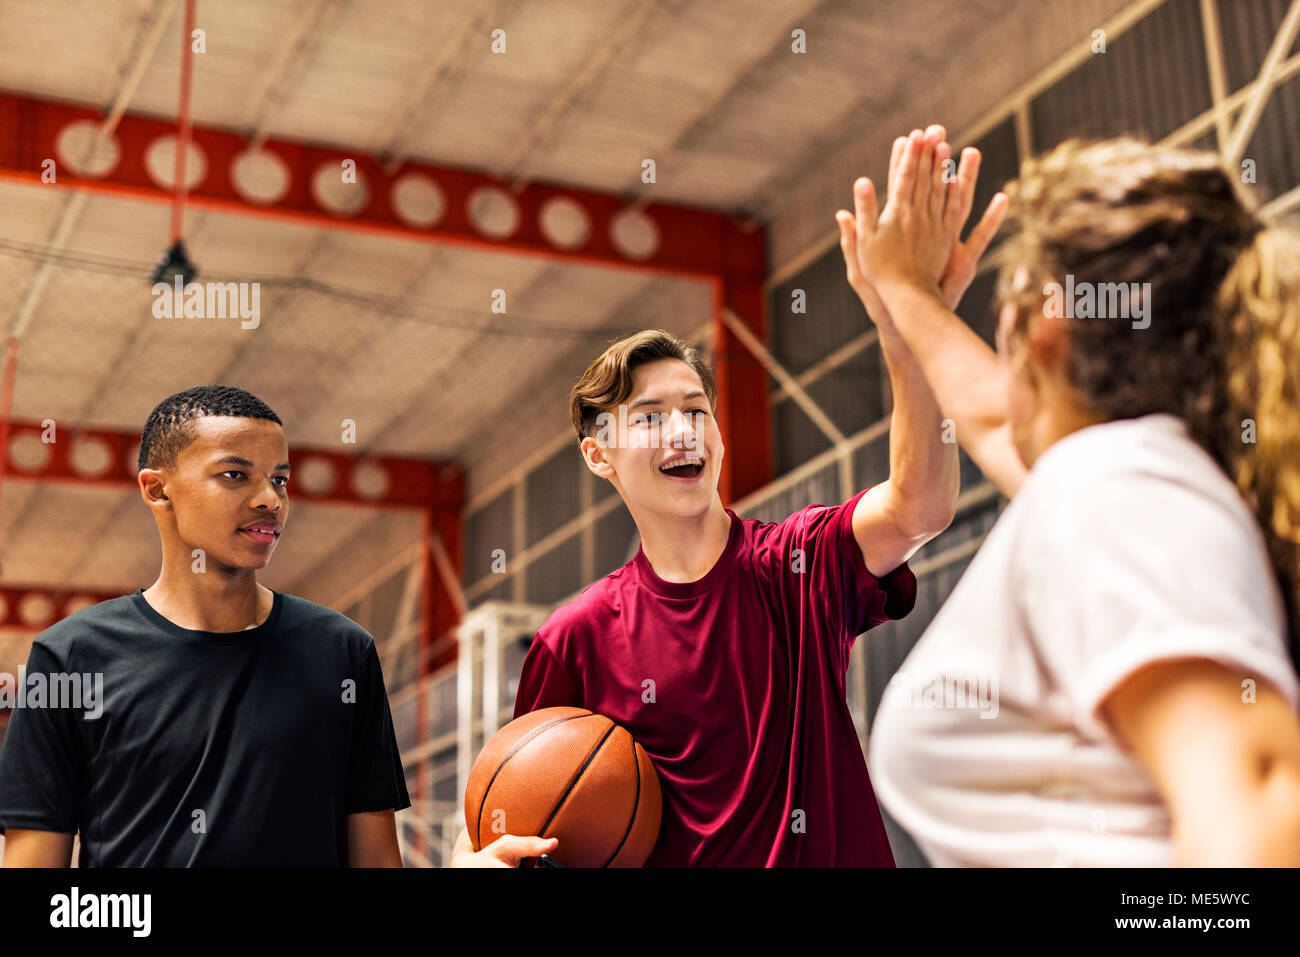 Group of teenager friends on a basketball court giving each other a high five Stock Photo